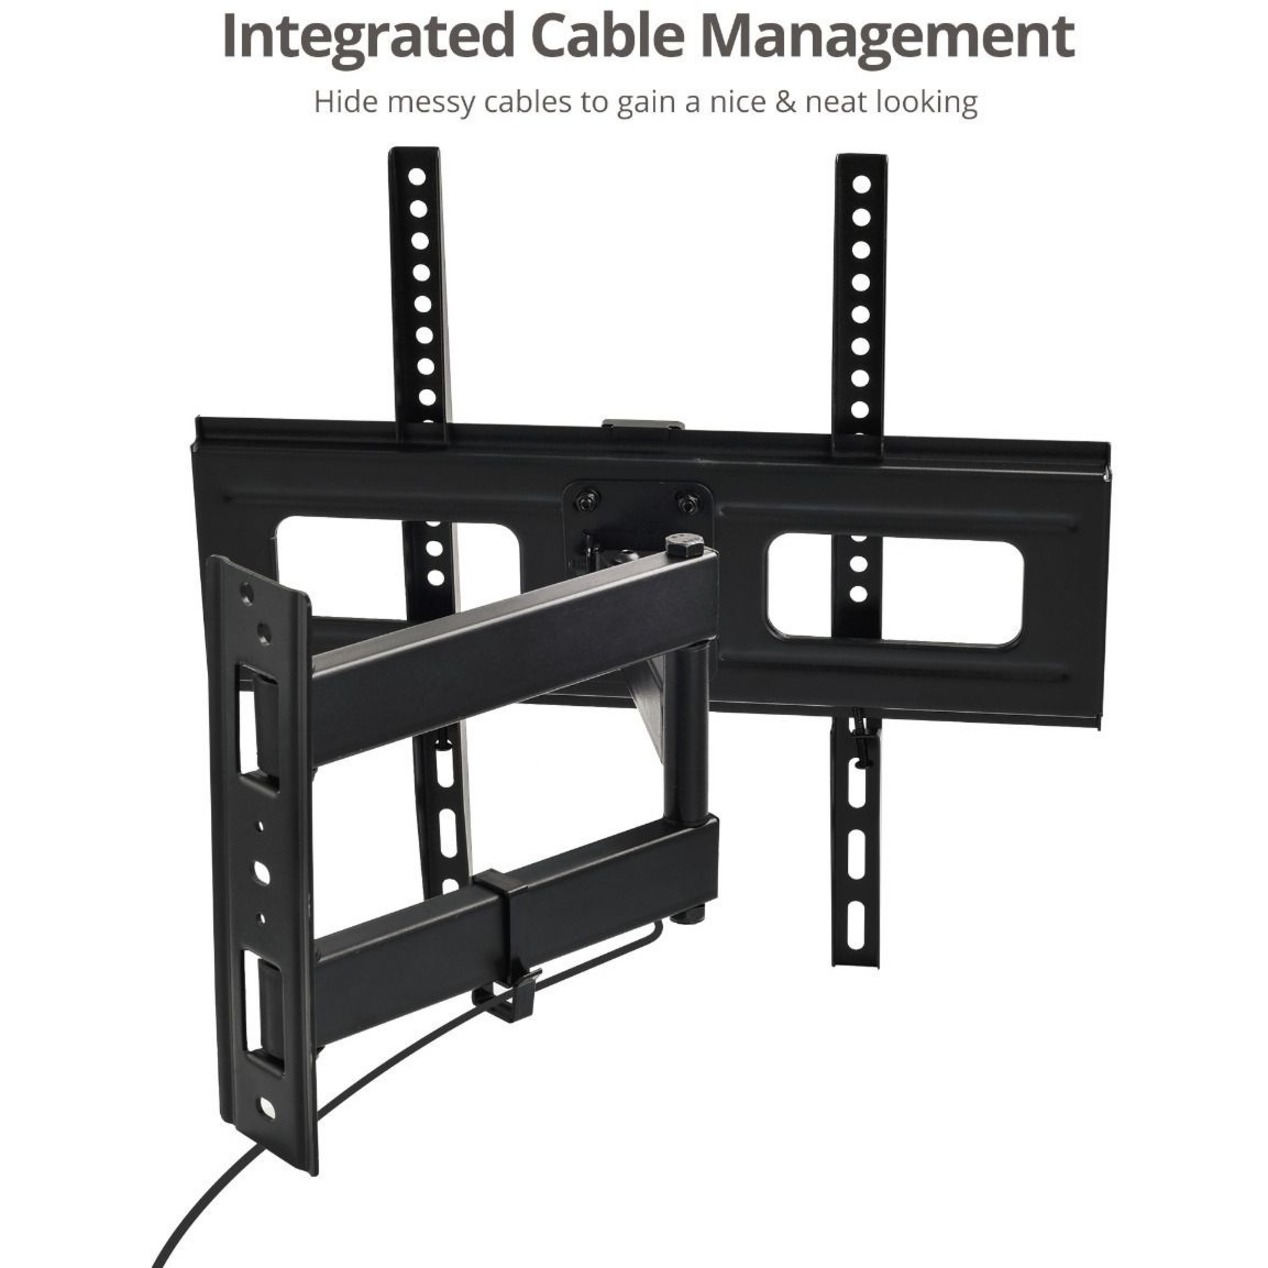 SIIG Full Motion TV Wall Mount 26" to 55", Black - image 4 of 7